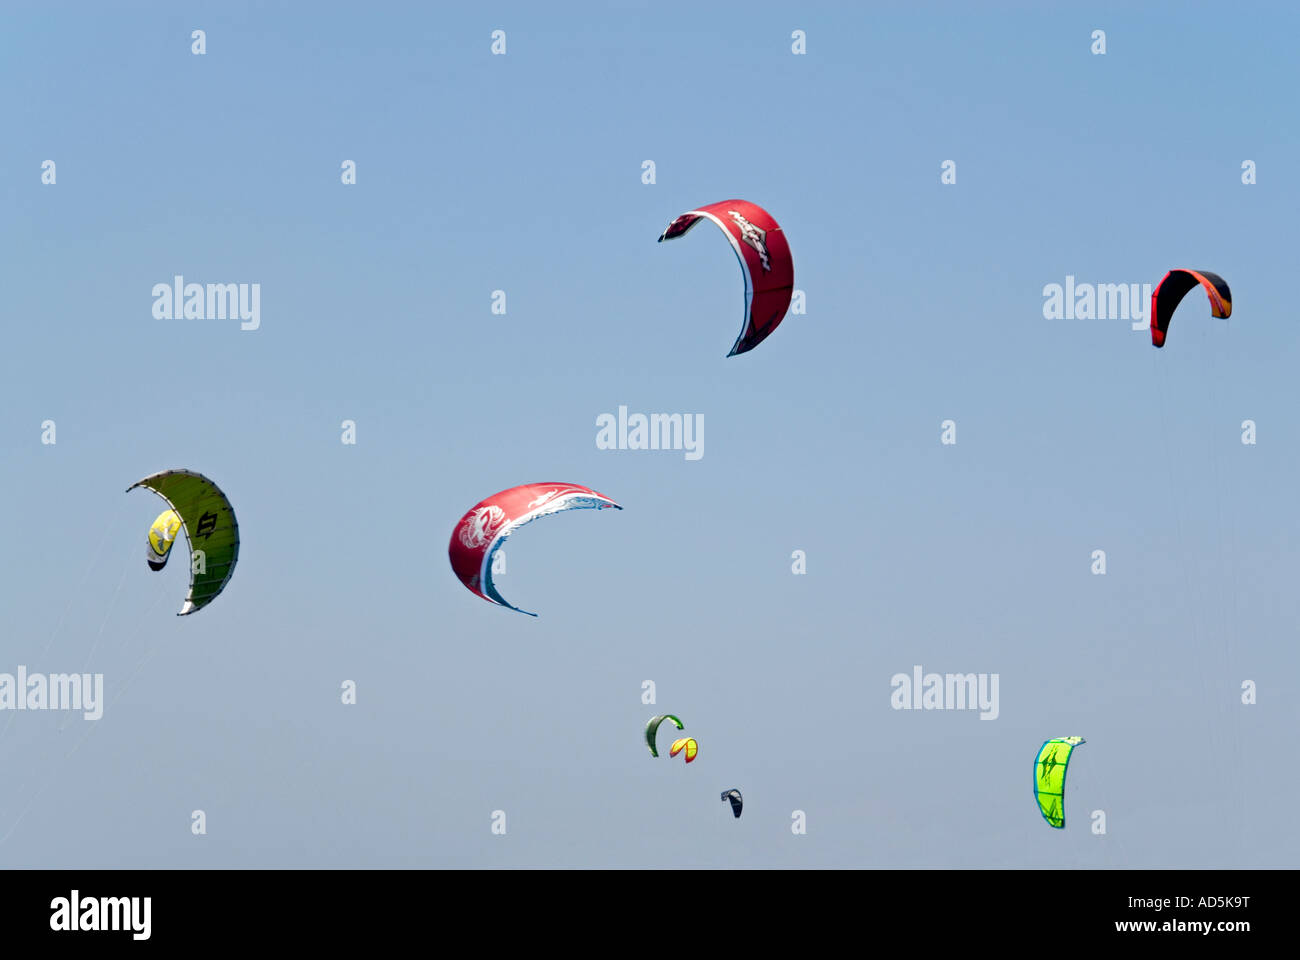 Horizontal view of a brightly coloured canopies from kitesurfers, overhead against a bright blue sky . Stock Photo